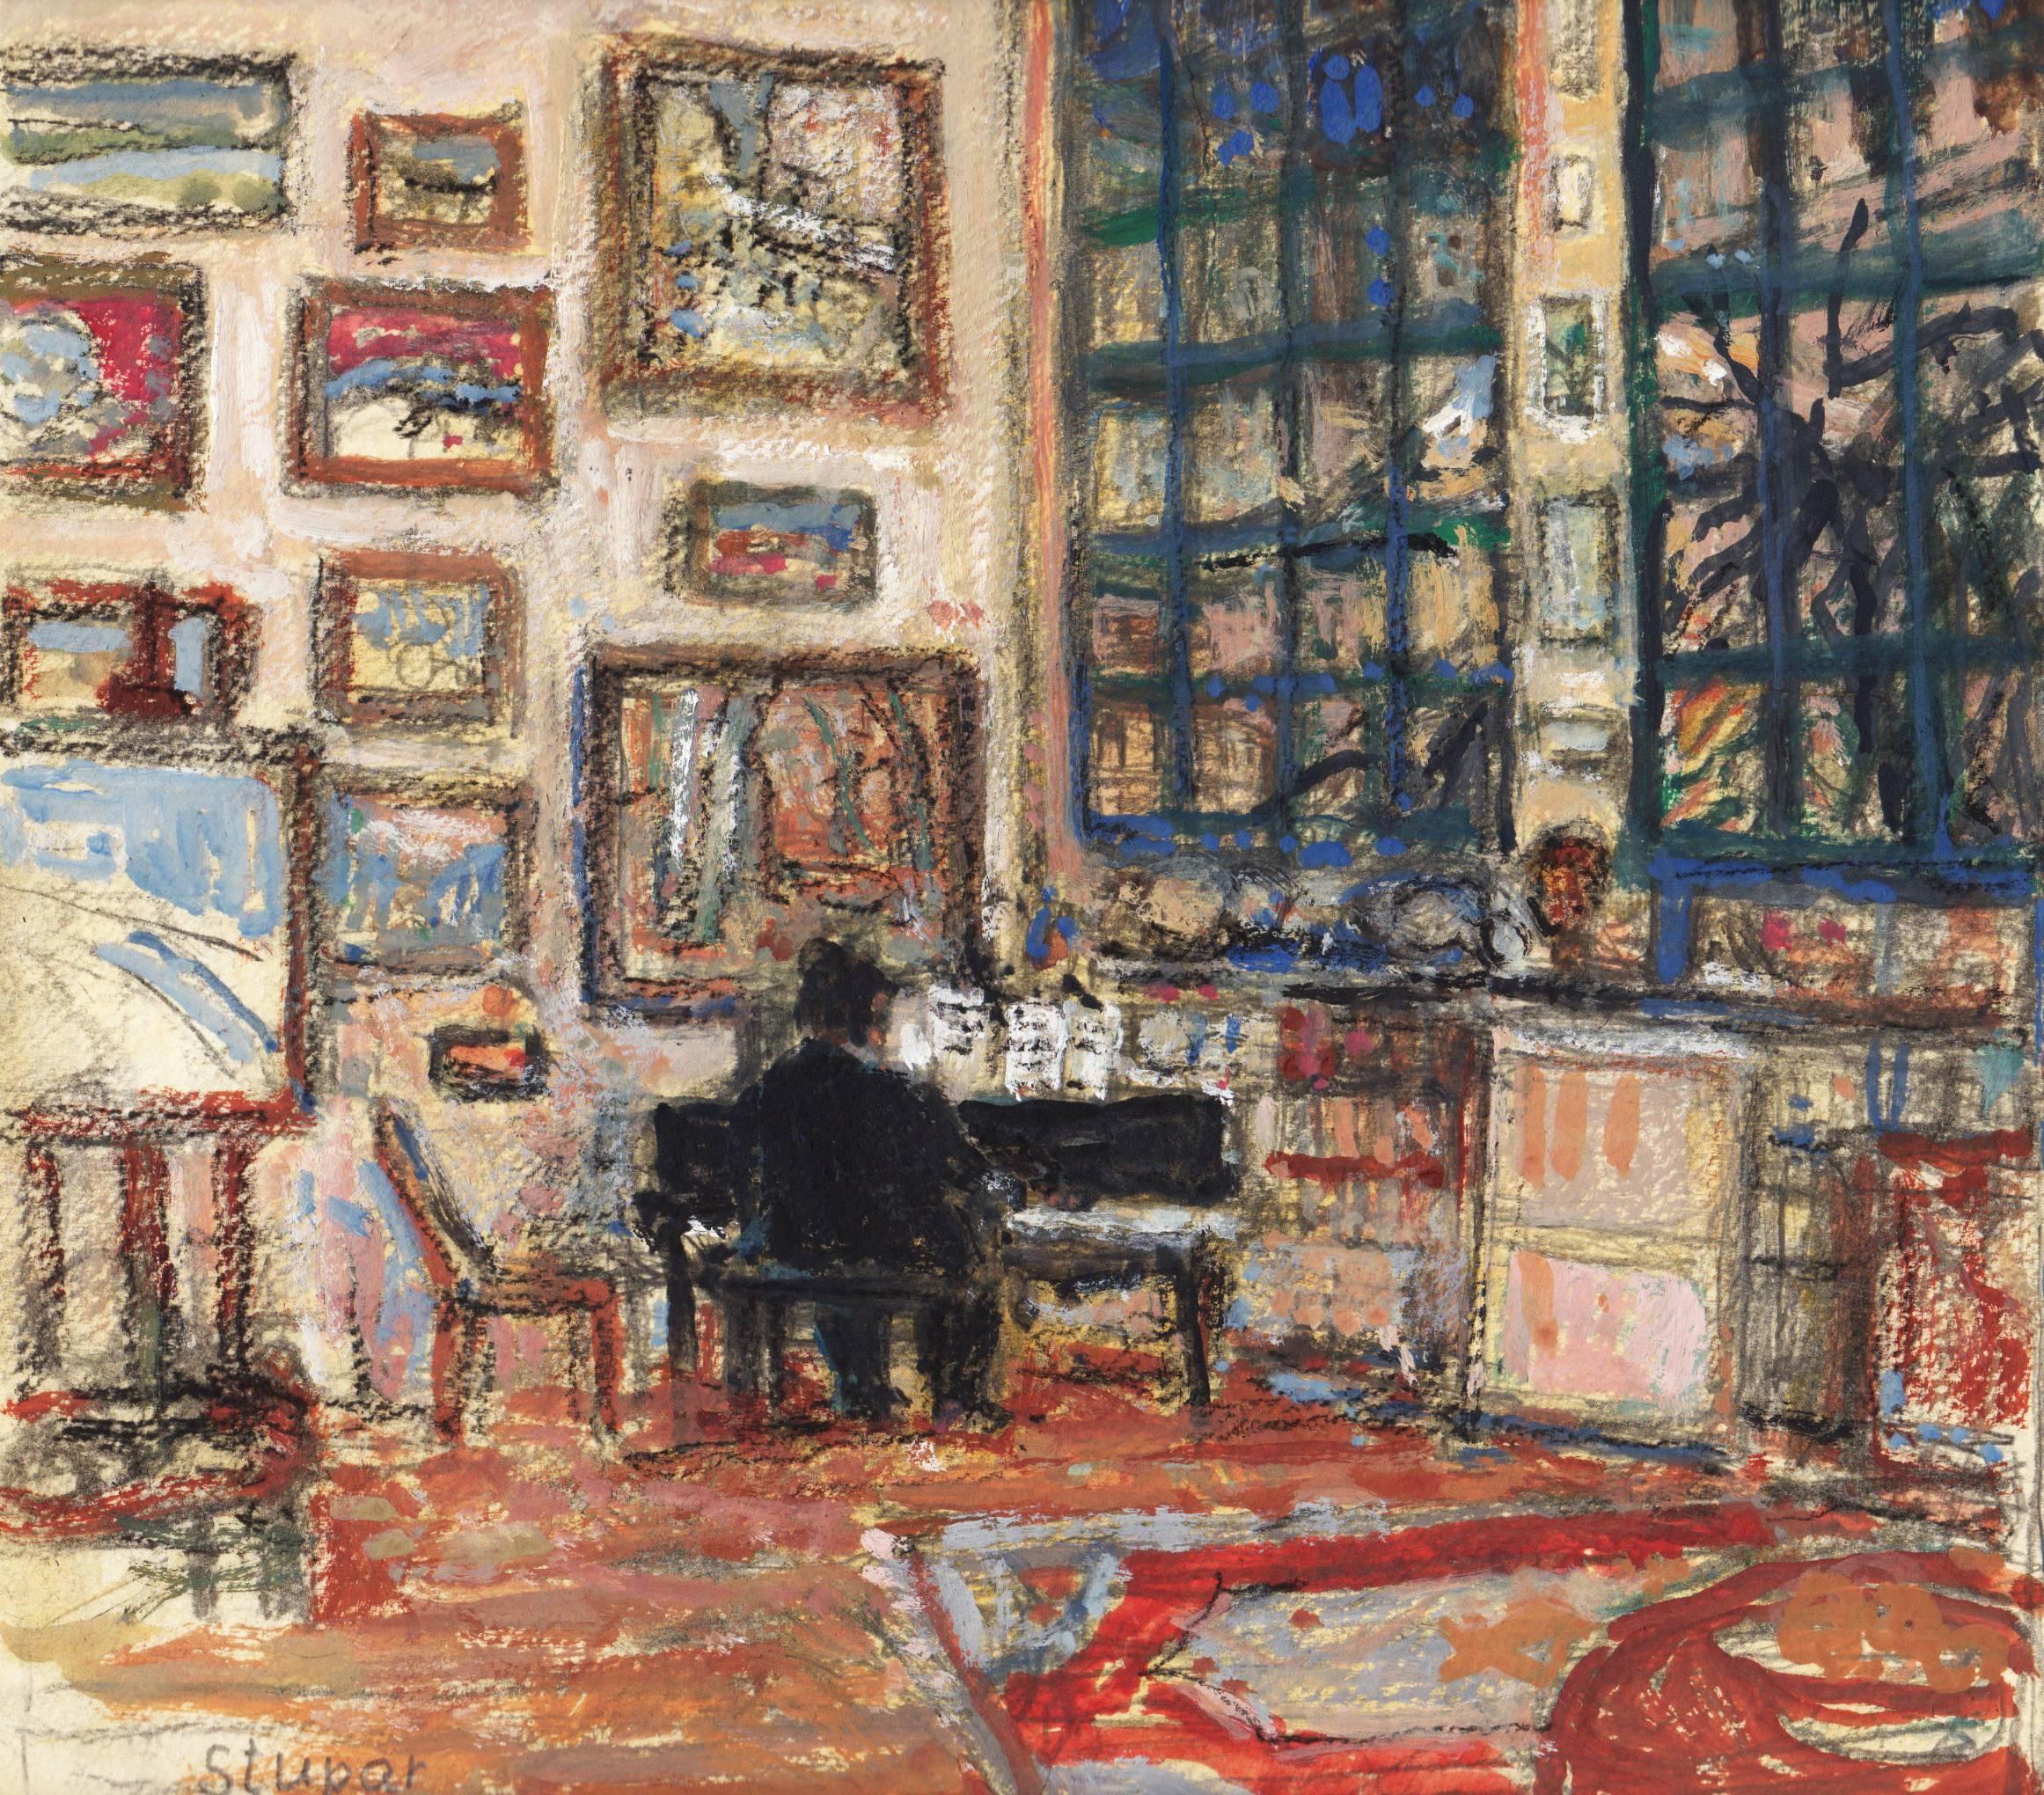 Marko STUPAR Interior Art - The studio of the painter with his wife playing the piano